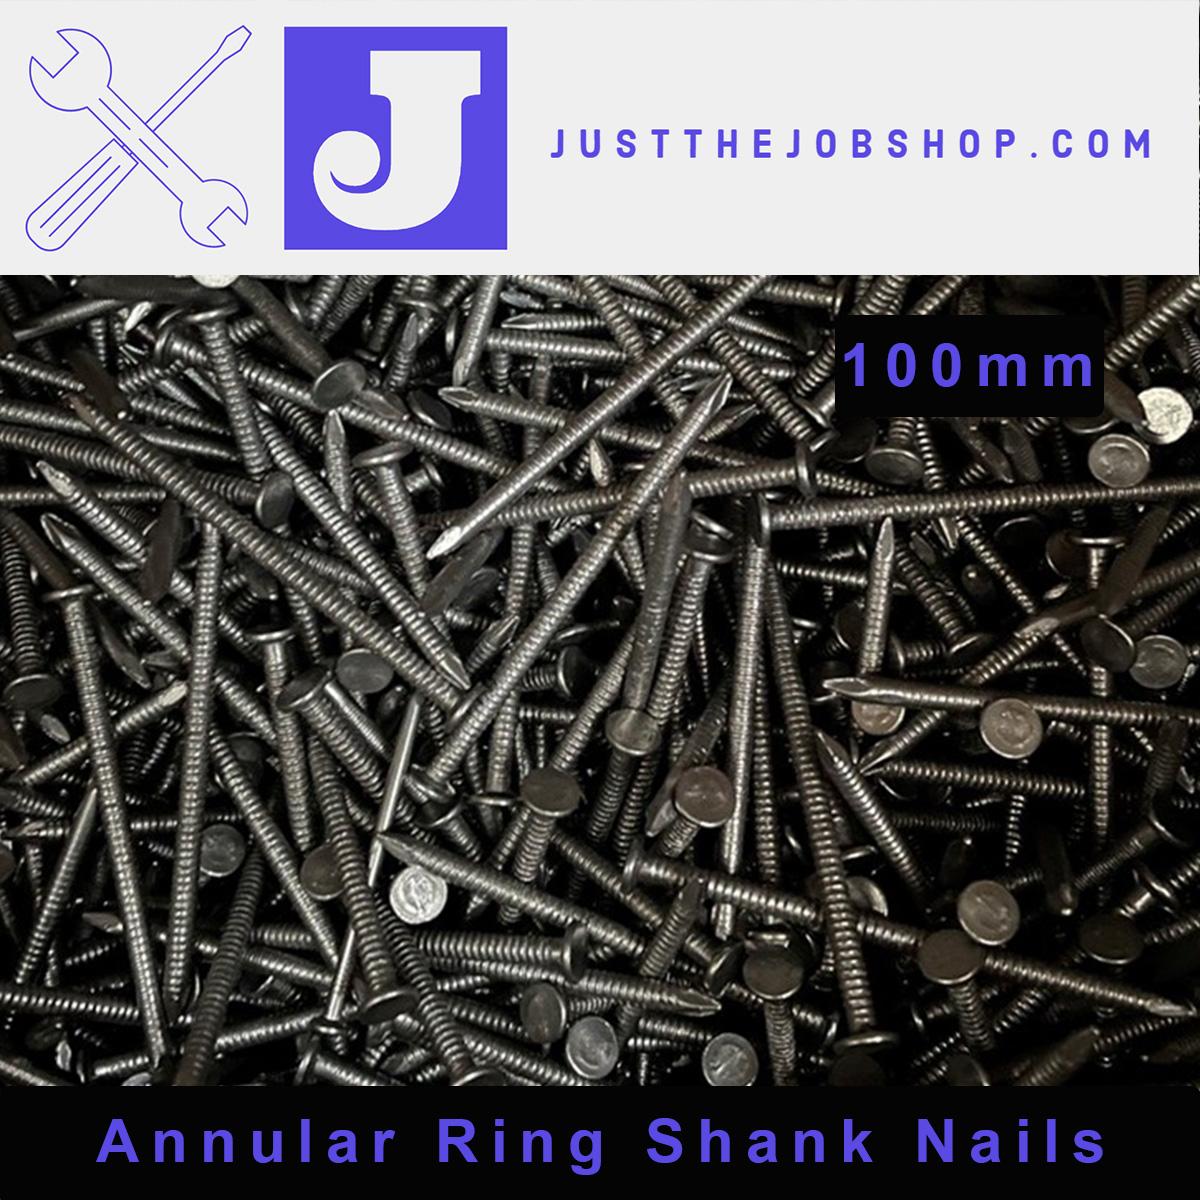 Annular Ring Shank Nails for timber, drywall, stud walls, minimal  resistance, various qtys and sizes